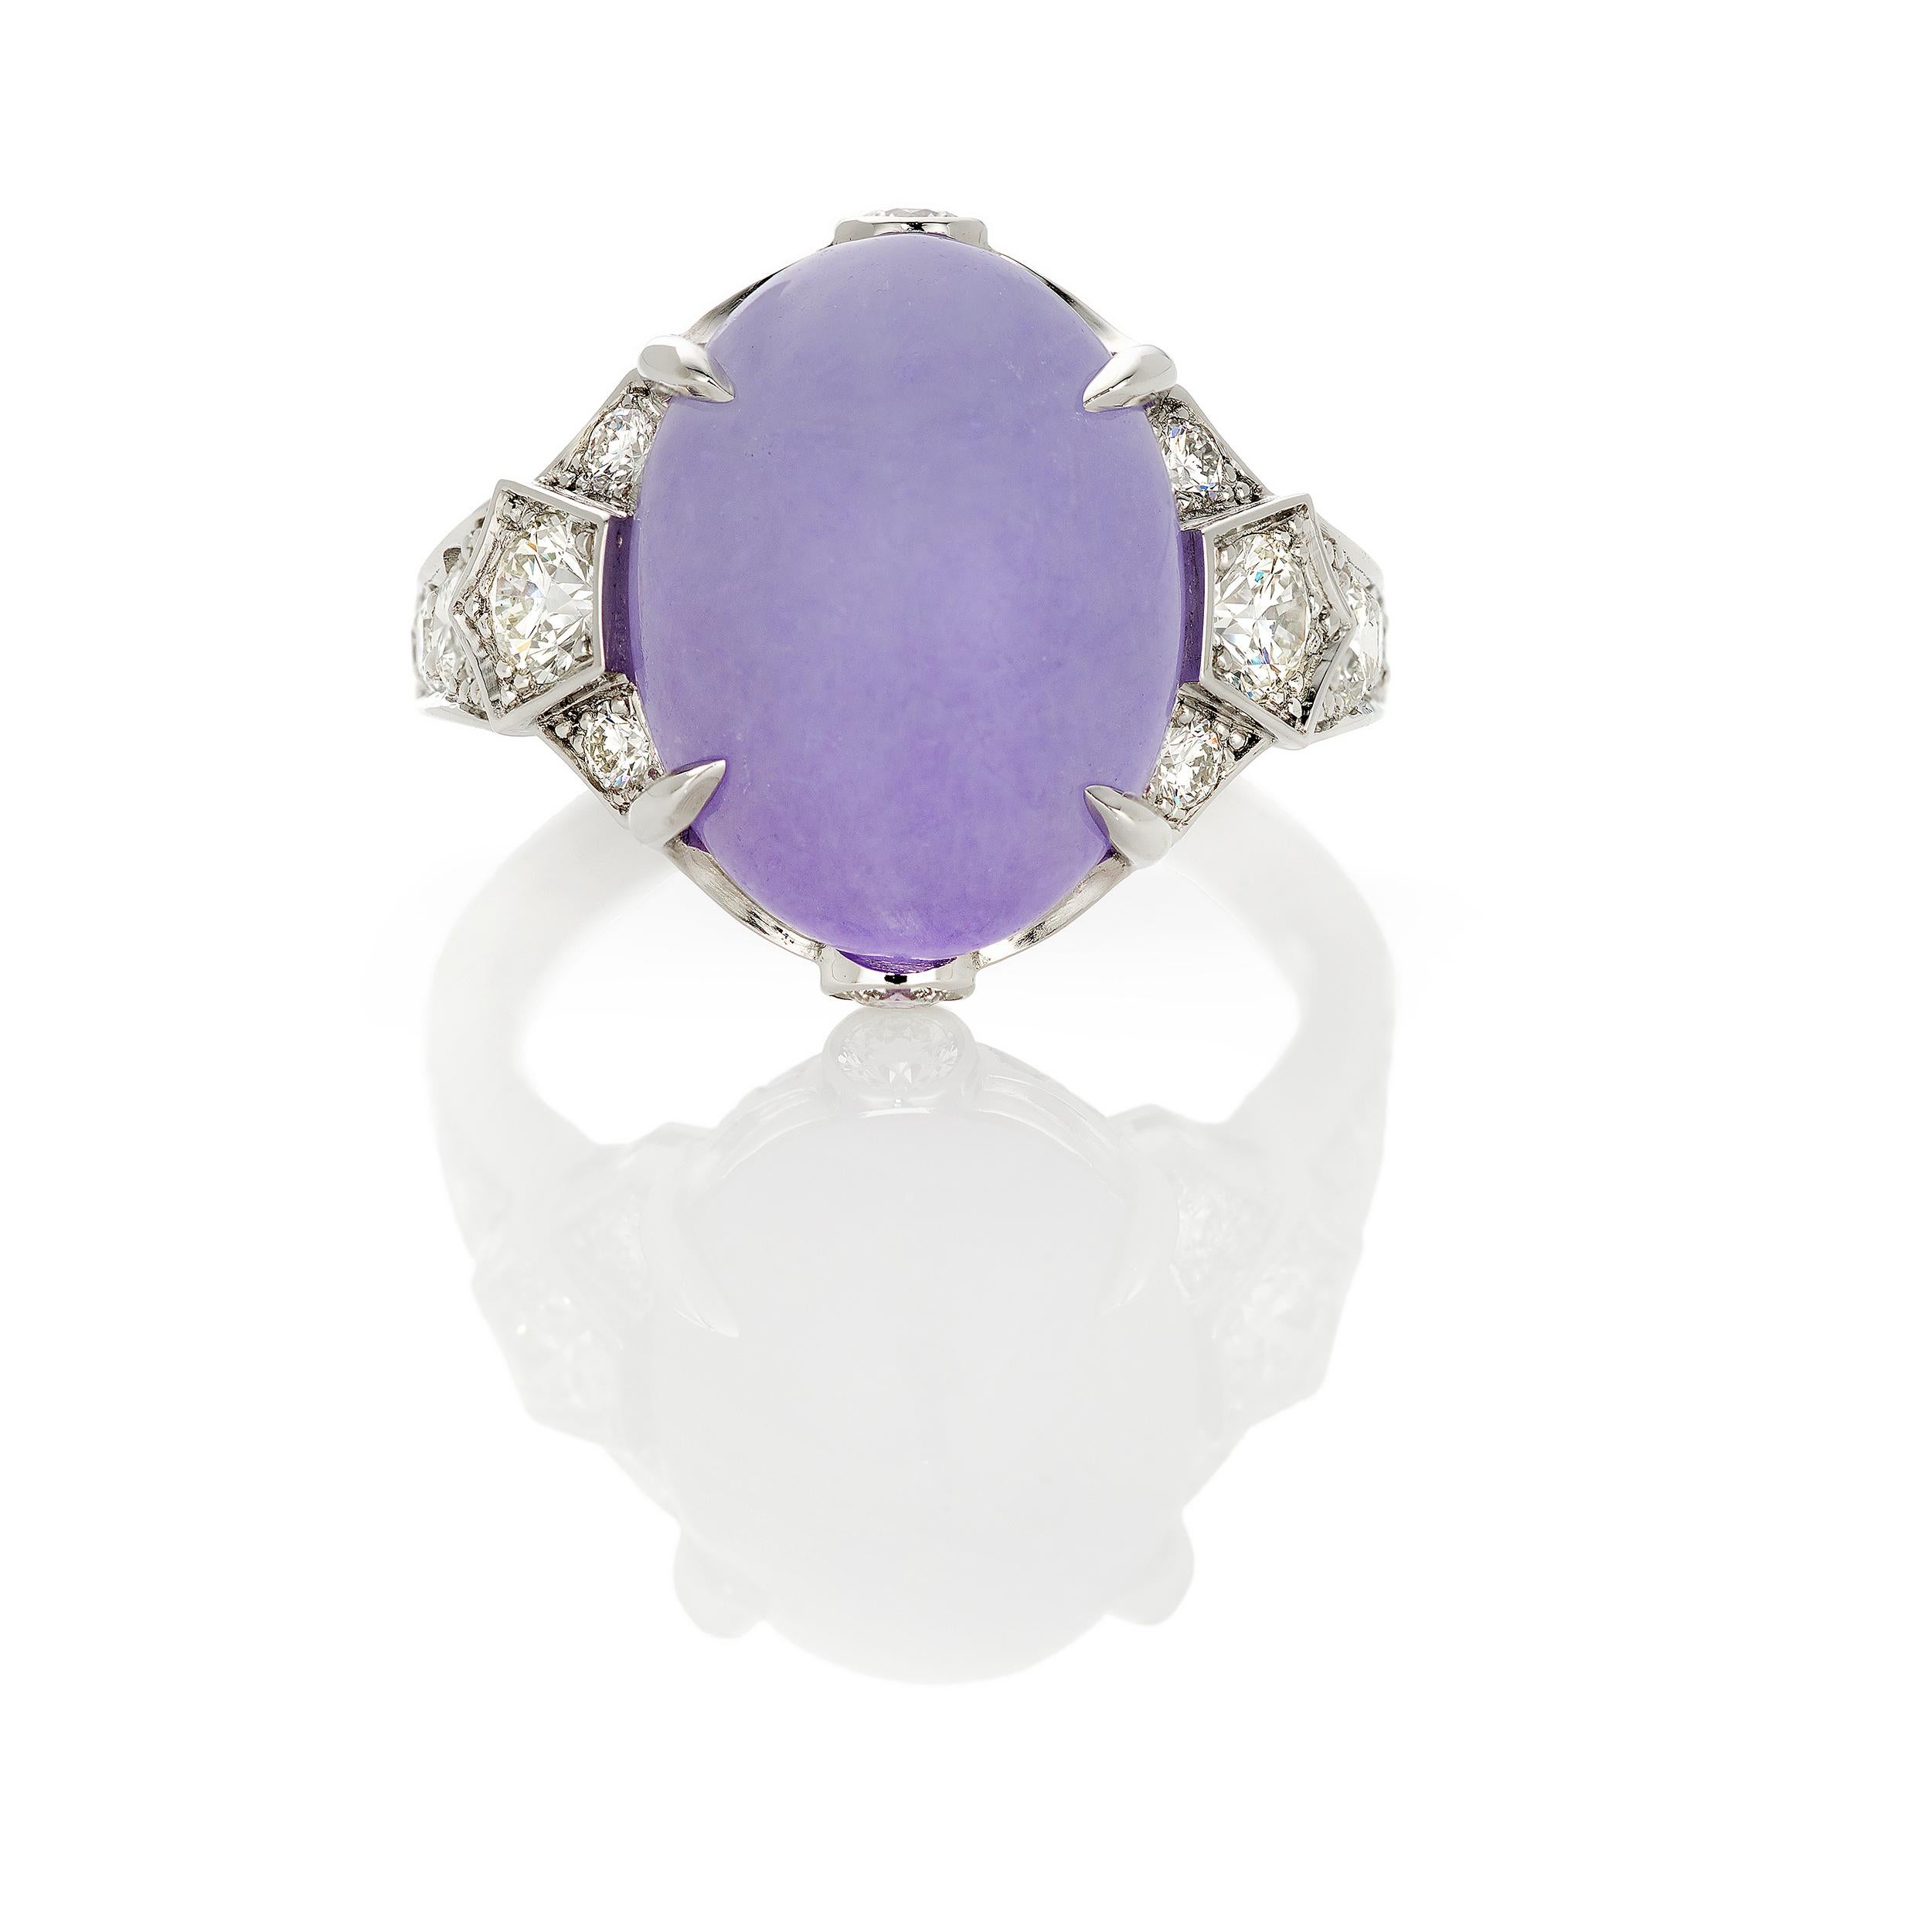 A one of a kind modern and different interpretation with natural and untreated fine Lavender Jadeite weighing 9.63 Carats.  This 11.4 x 15.0 x 6.9 mm Lavender Jadeite has a clean design with attention to detail from every possible angle.  A